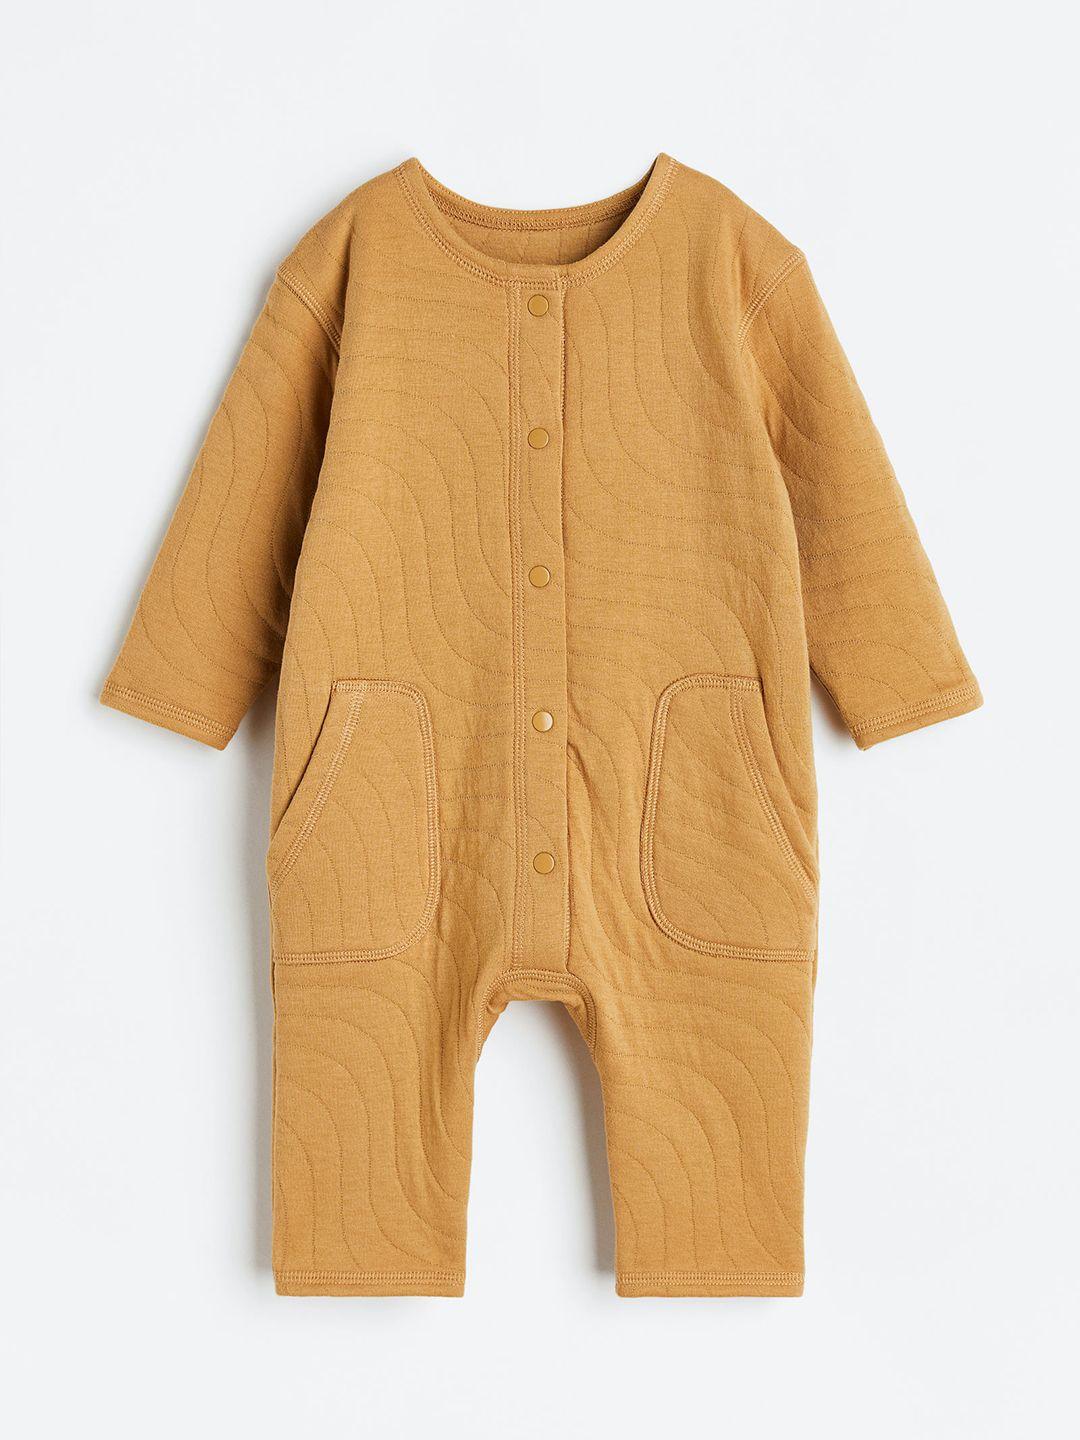 H&M Infant Girls Quilted Jersey Romper Suit